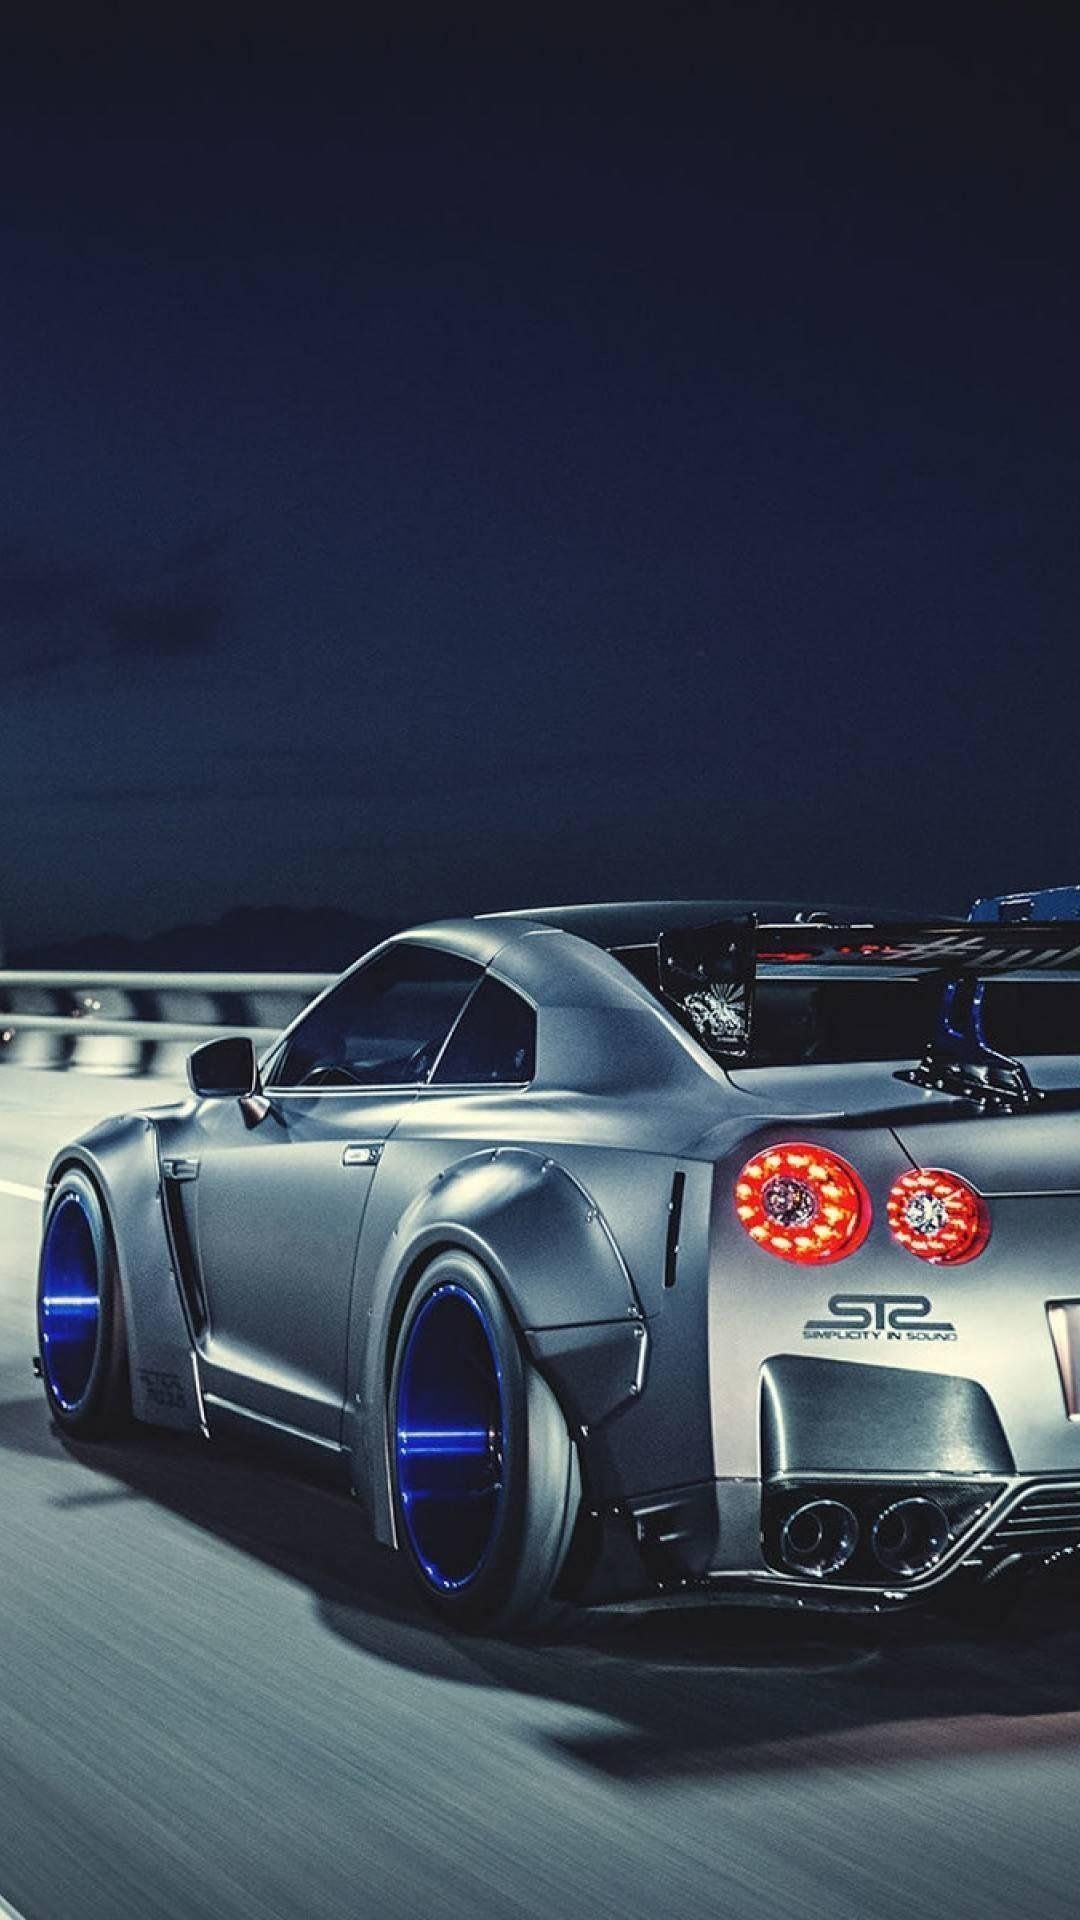 Download Aesthetic nissan gt r Wallpaper for iPhone, Android, Desktop and Mobile devices. - Nissan Skyline